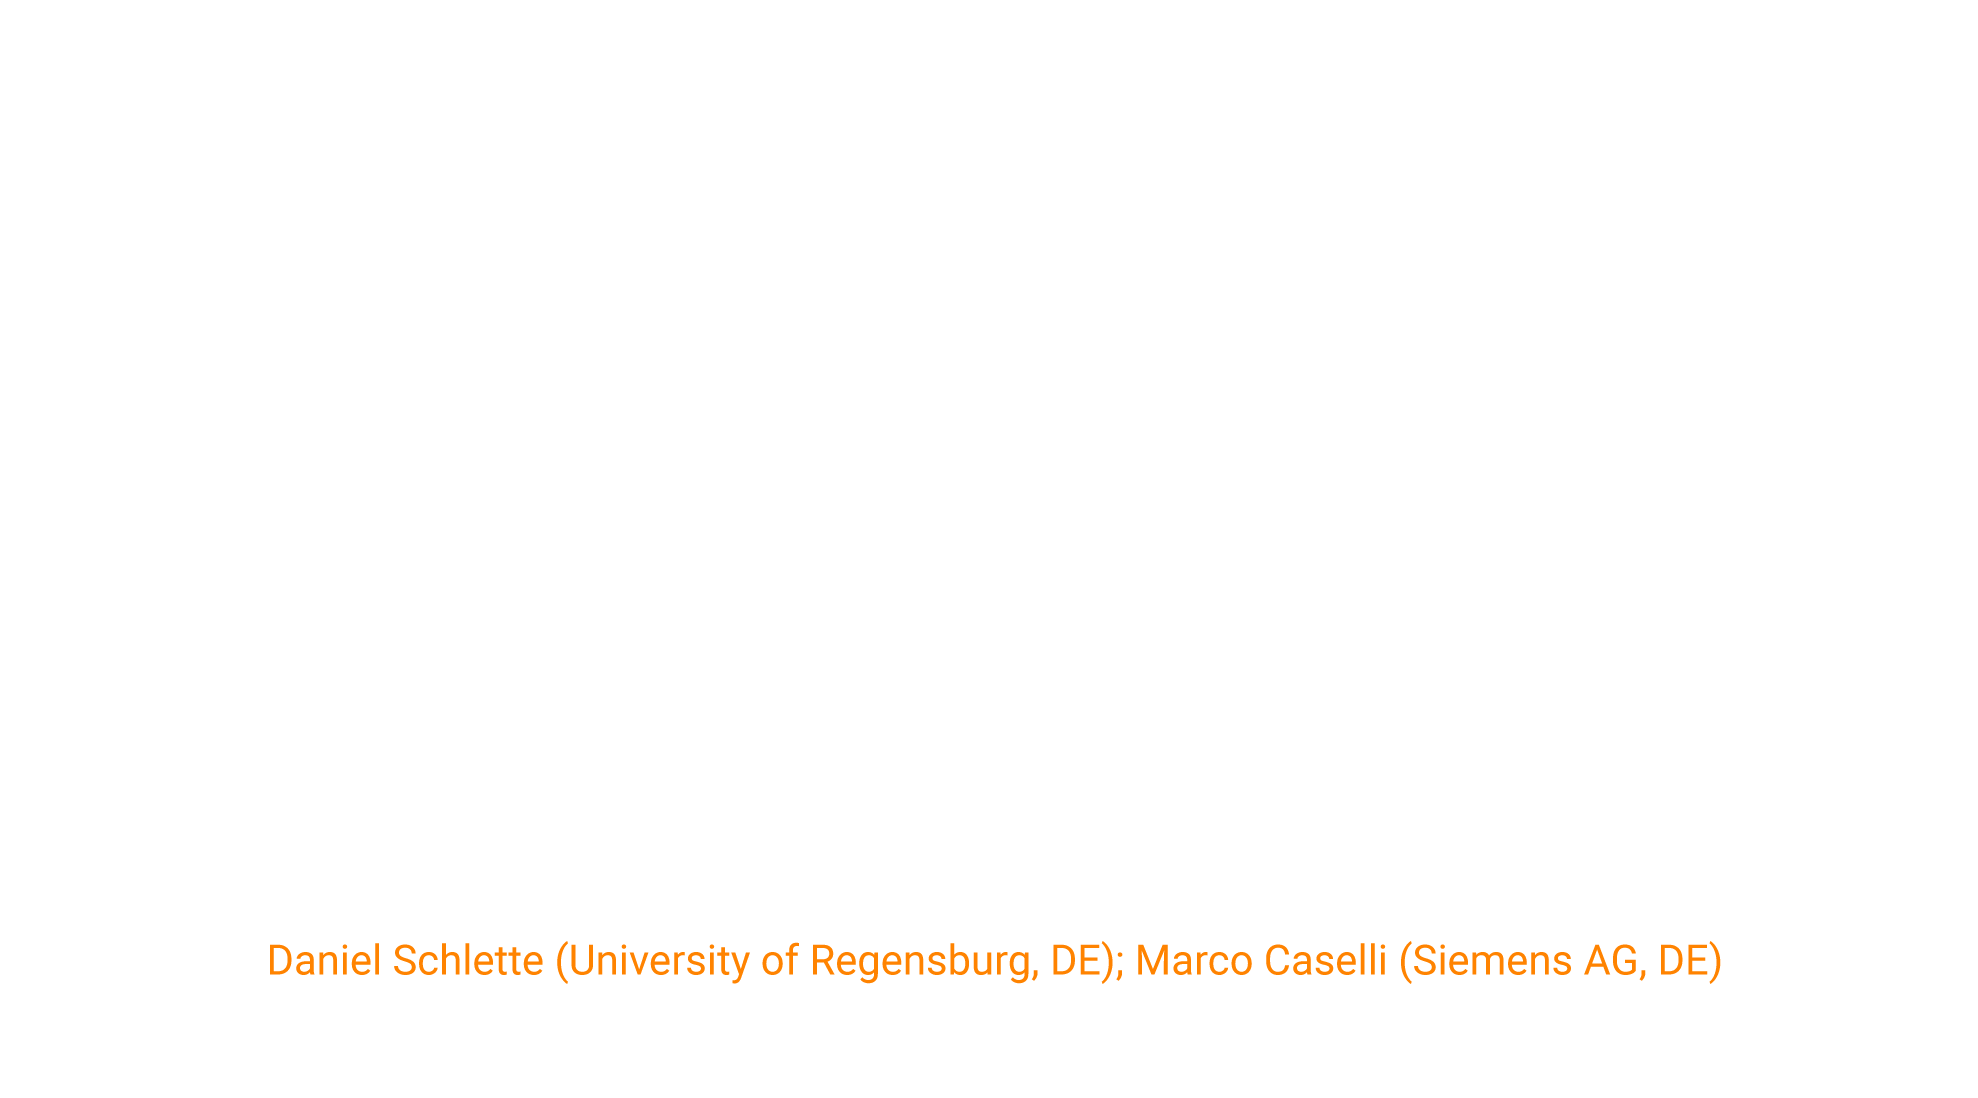 Beyond Incident Reporting - An Analysis of Structured Representations for Incident Response